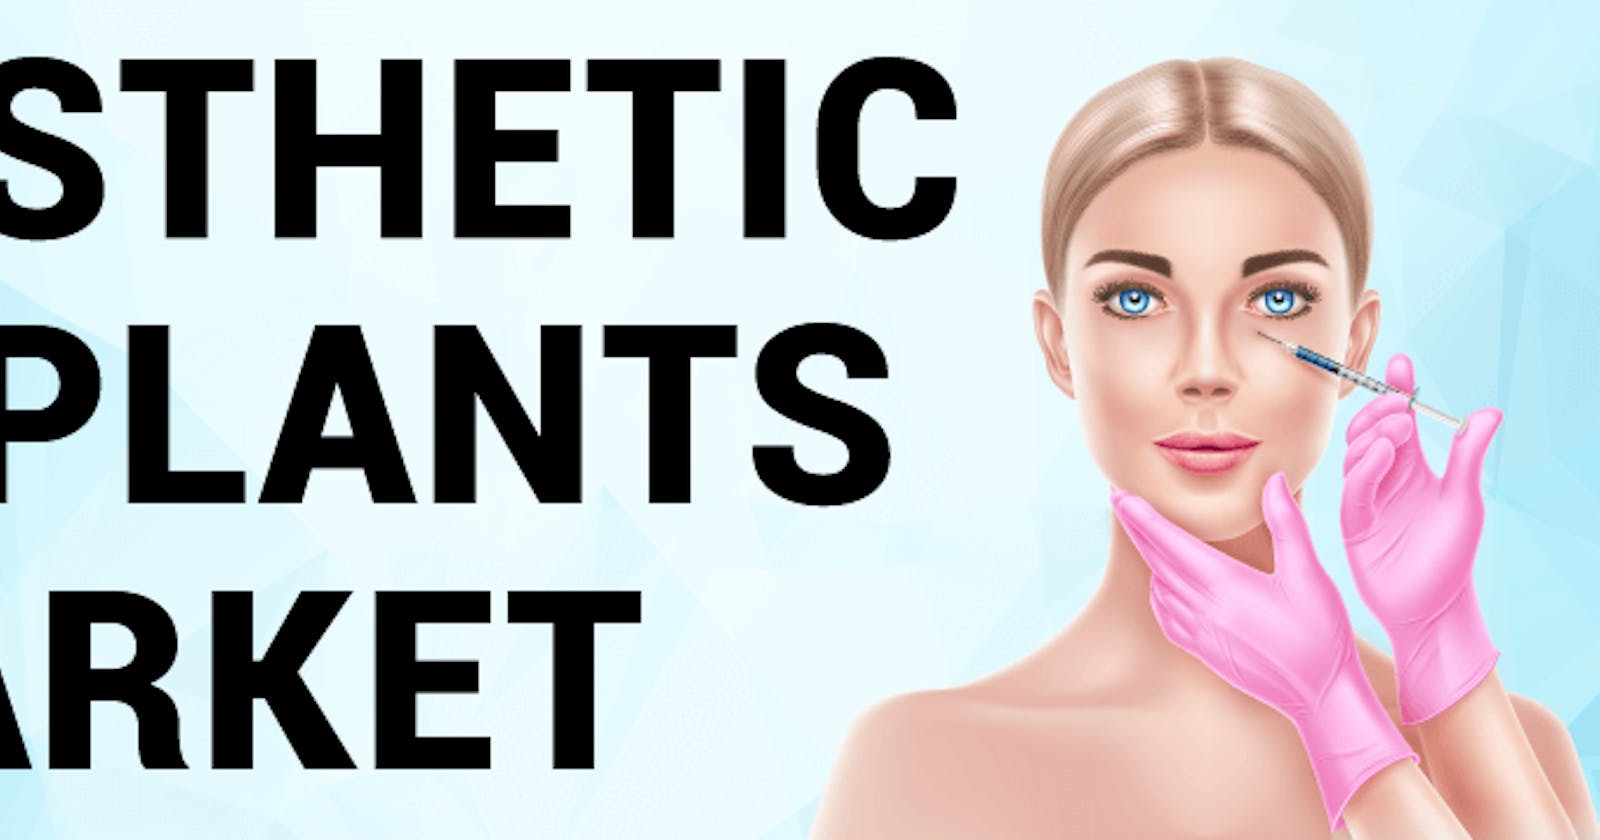 Aesthetic Implants Market: Enhancing Beauty with Surgical Precision